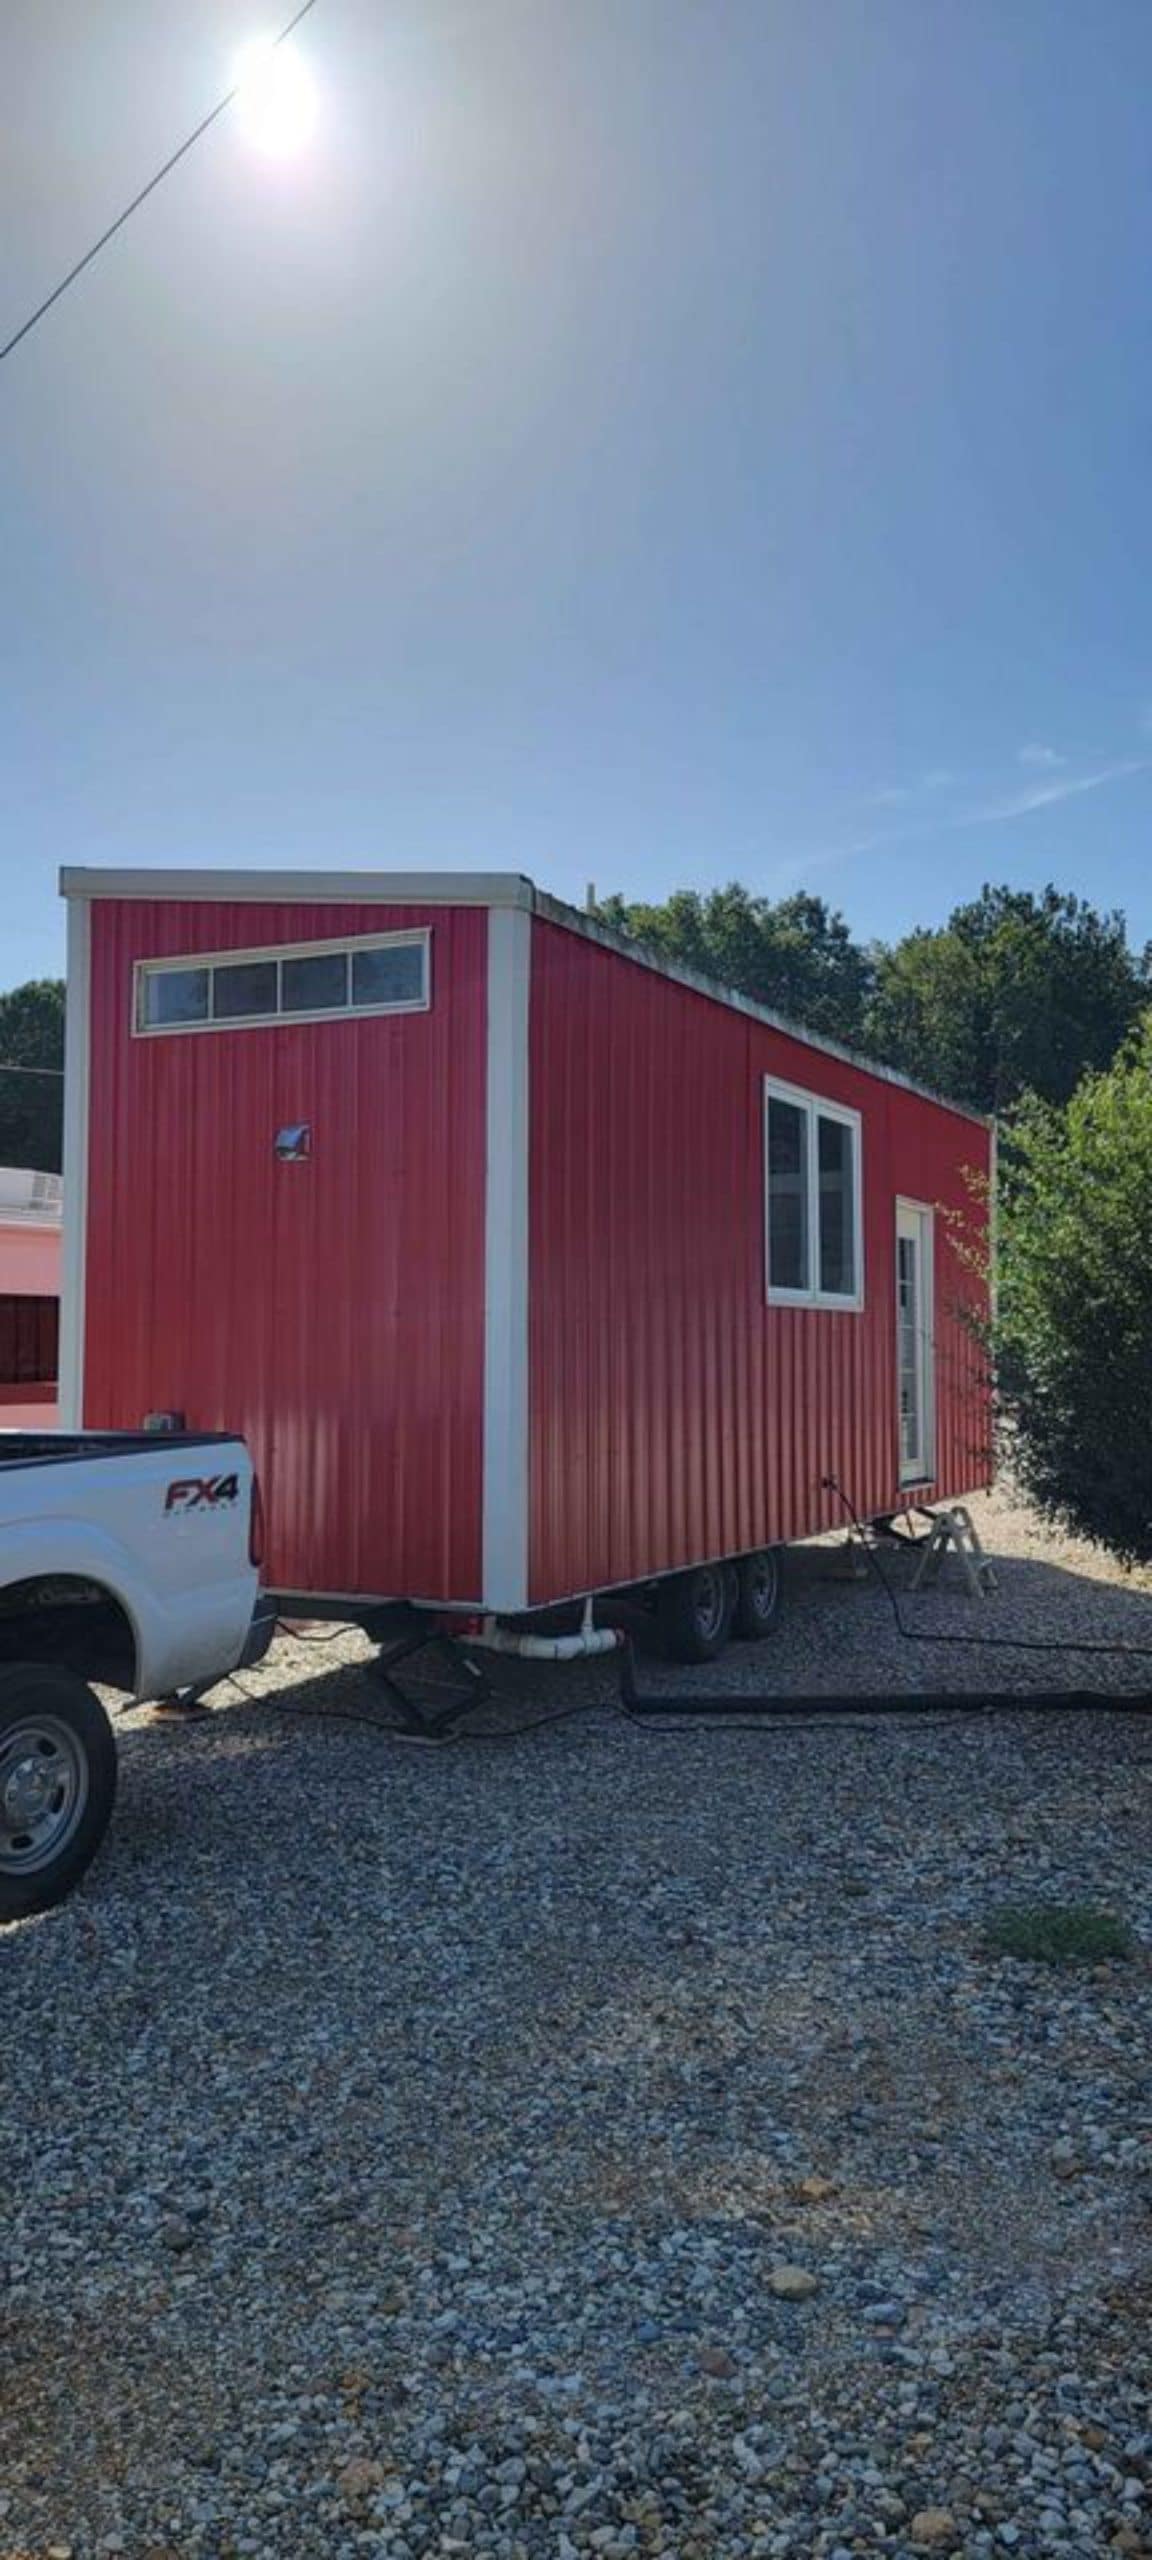 28' Budget Friendly Tiny House from side view